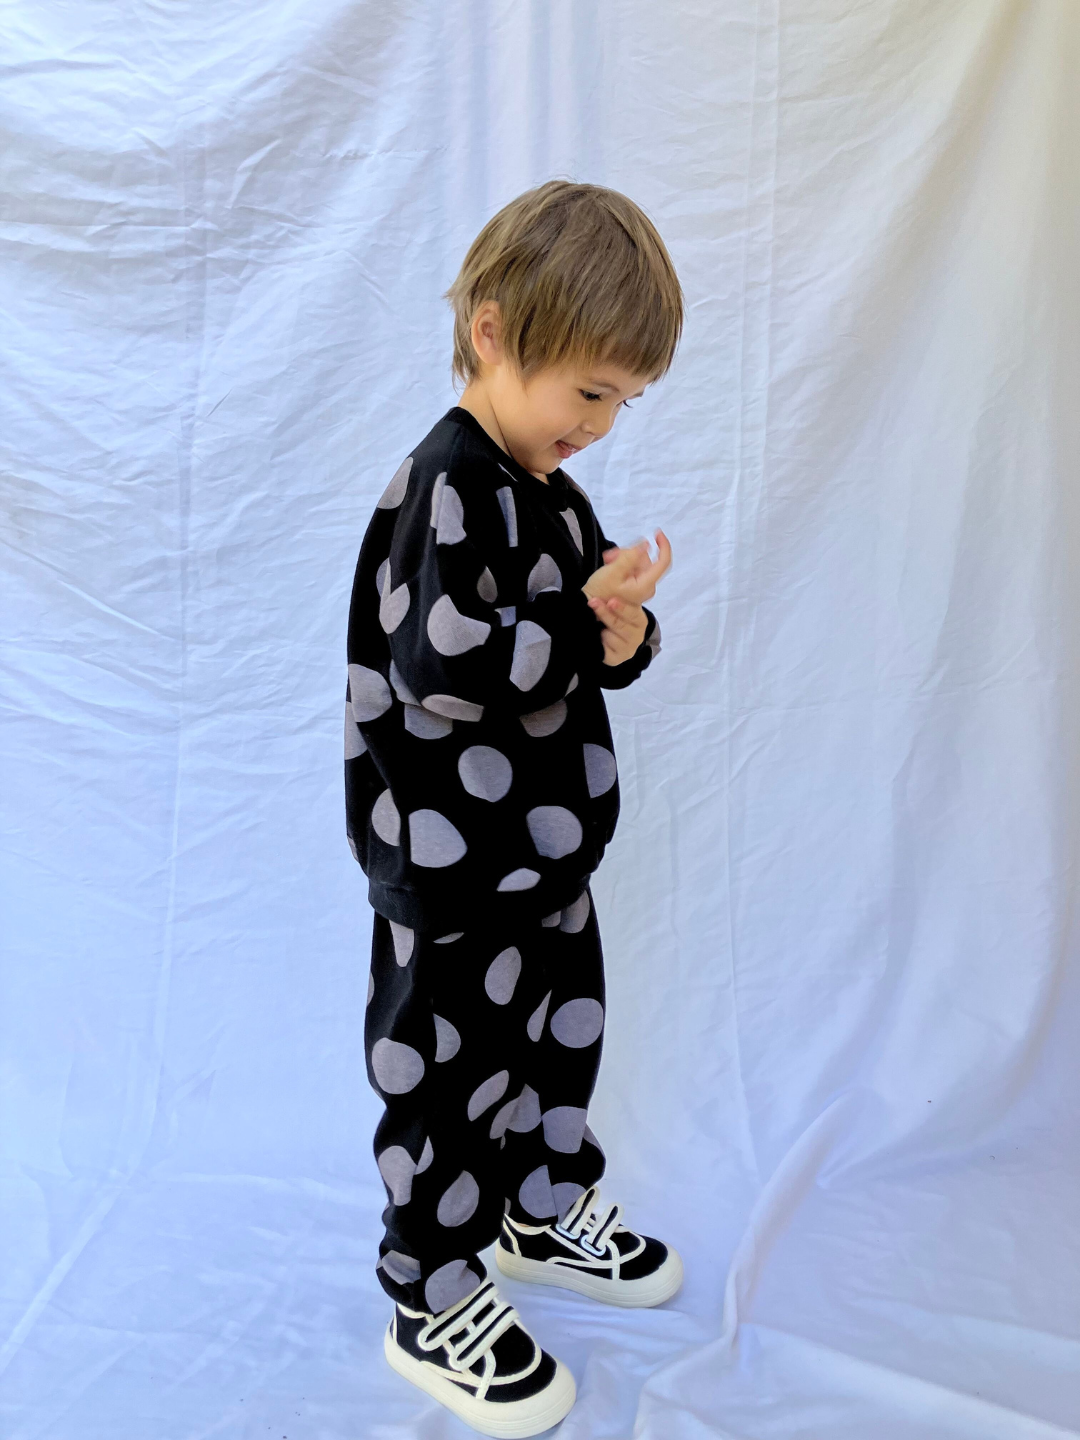 A child wearing a sweat set in black with large grey polka dots. The set consists of a crewneck sweatshirt and a matching sweatpant, with an oversized fit. He wears black velcro sneakers with white trim and is standing on a white sheet backdrop.